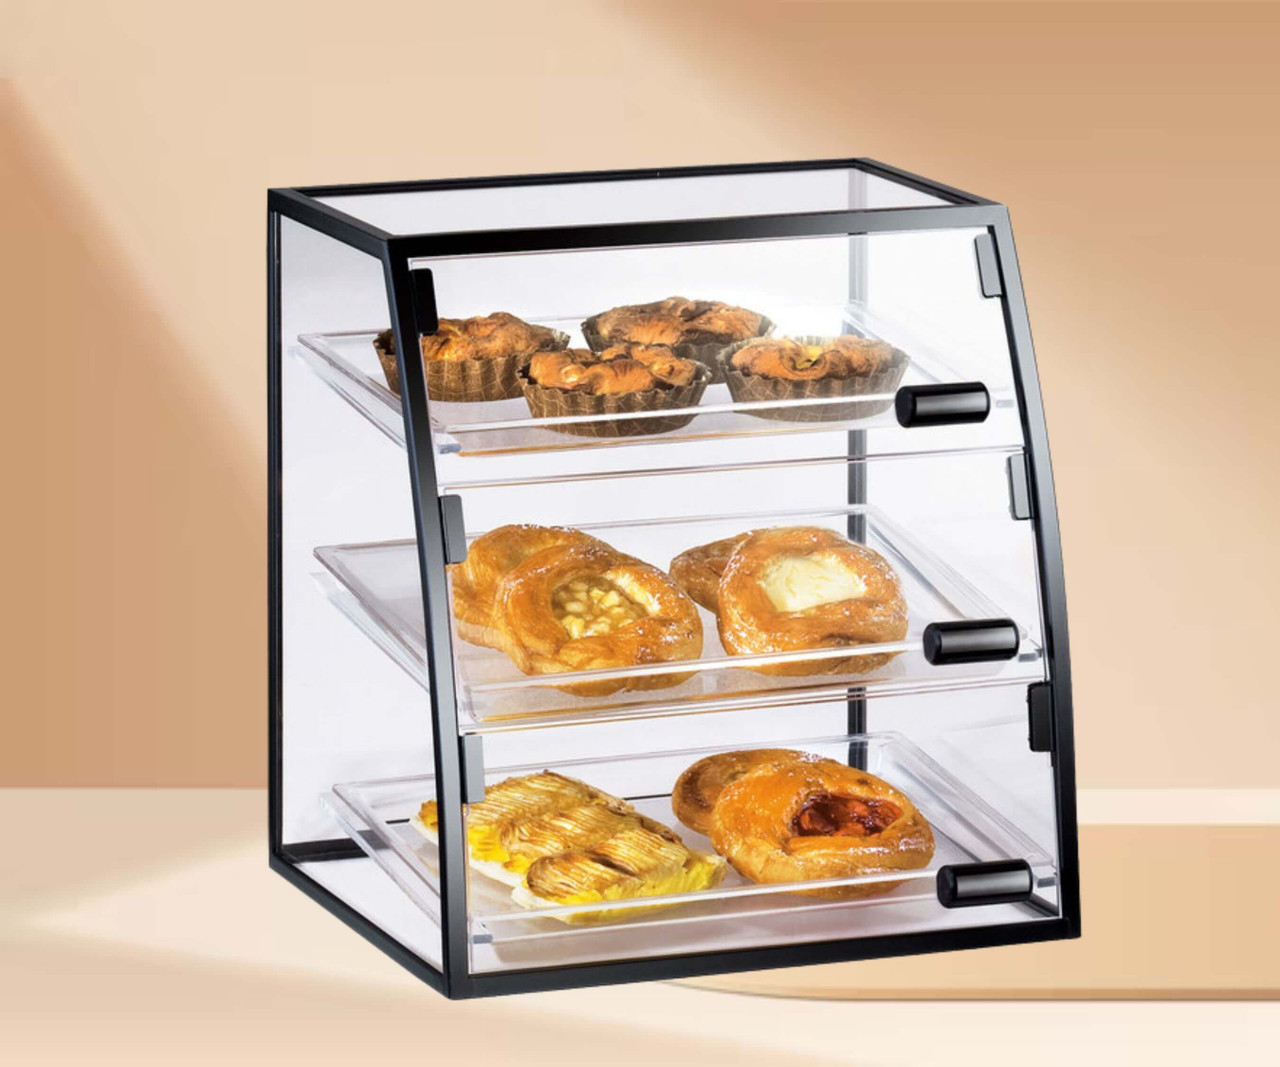 Cal-Mil Convenience 16" x 15" x 17 1/4" Iron Curved Self-Service Display Case-Chicken Pieces